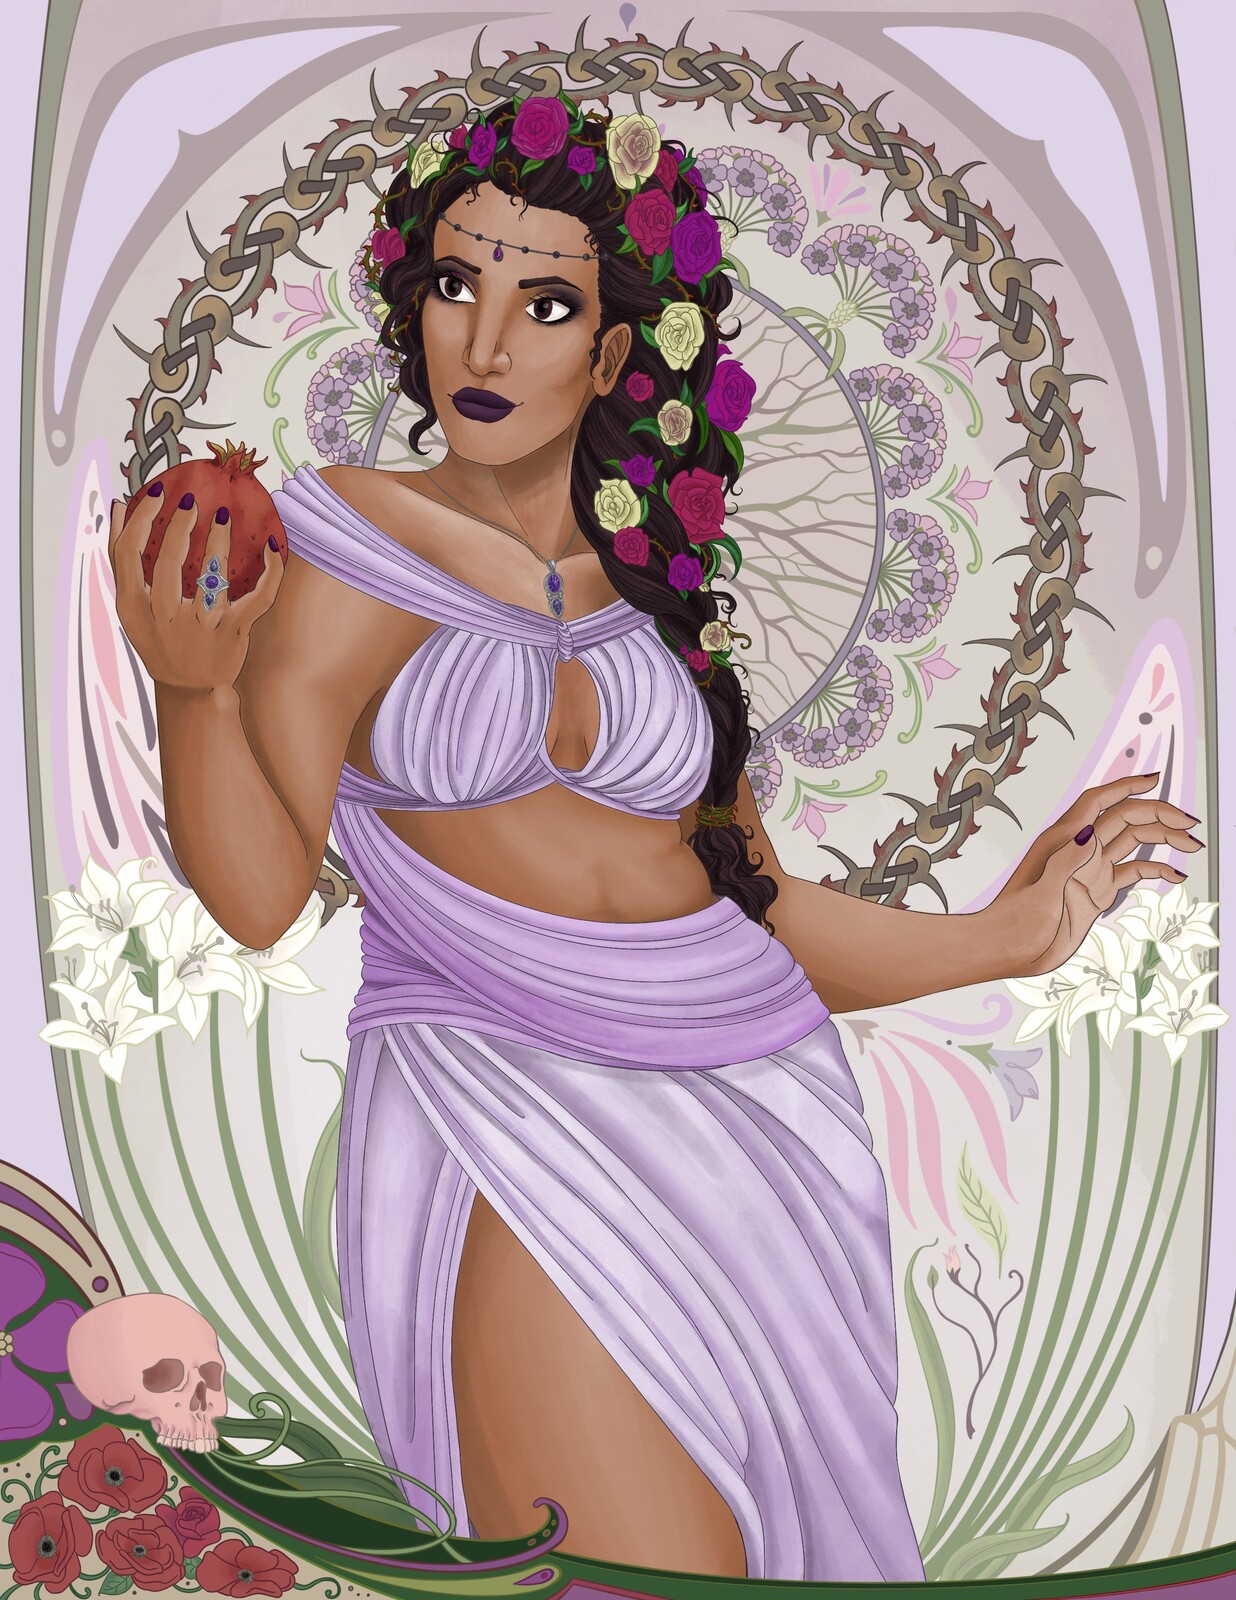 Persephone, goddess of the spring and queen of Hades